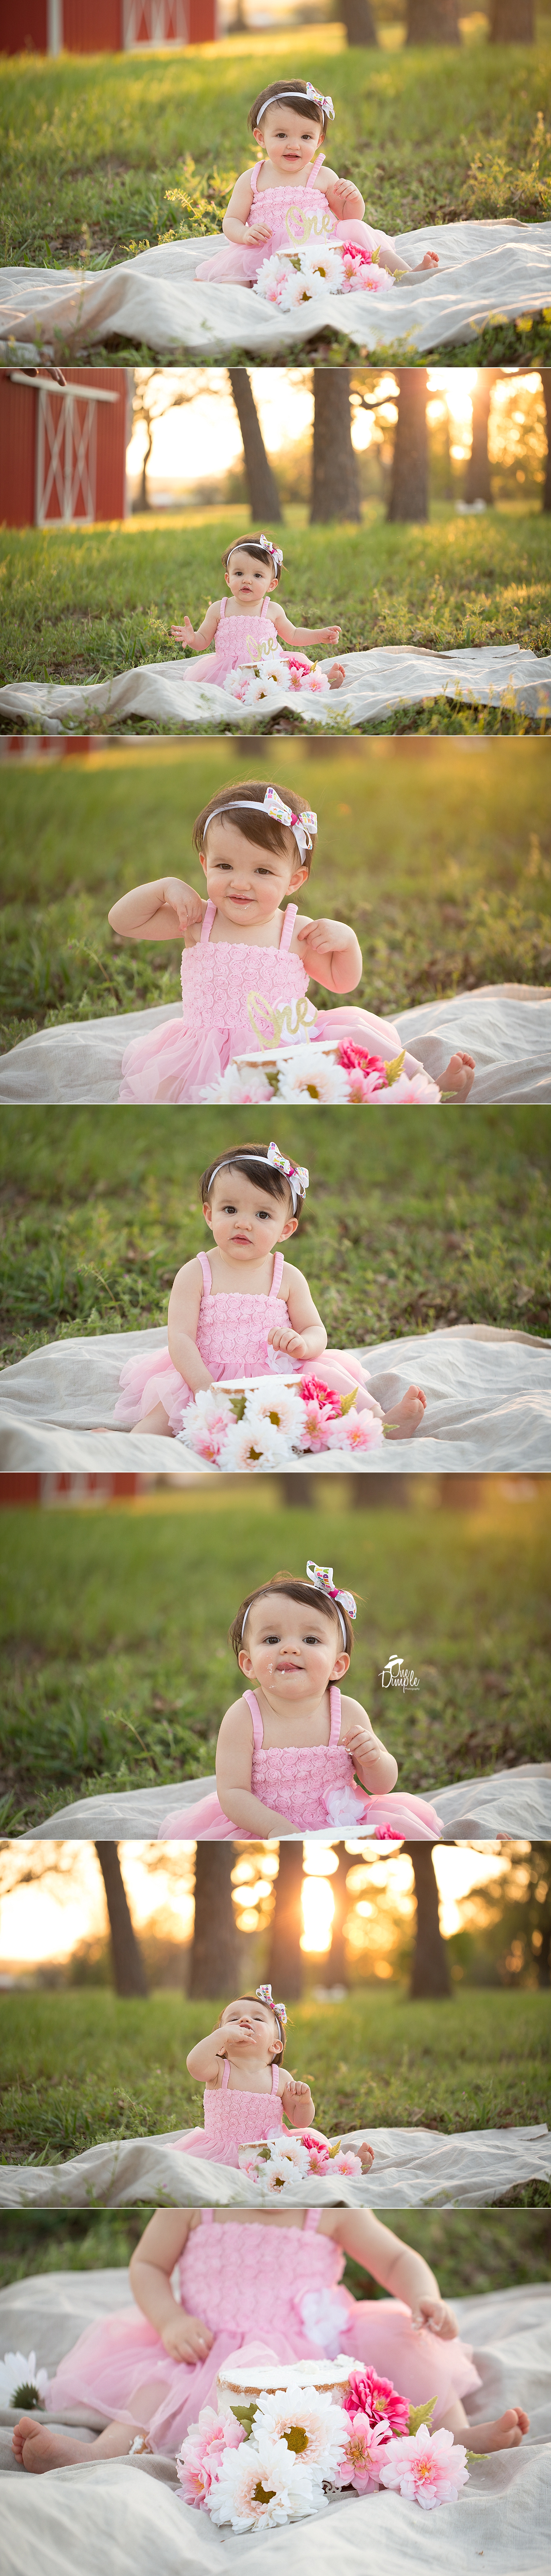 One Dimple Photography Fort Worth Outdoor Cake Smash Session with little girl and flowers